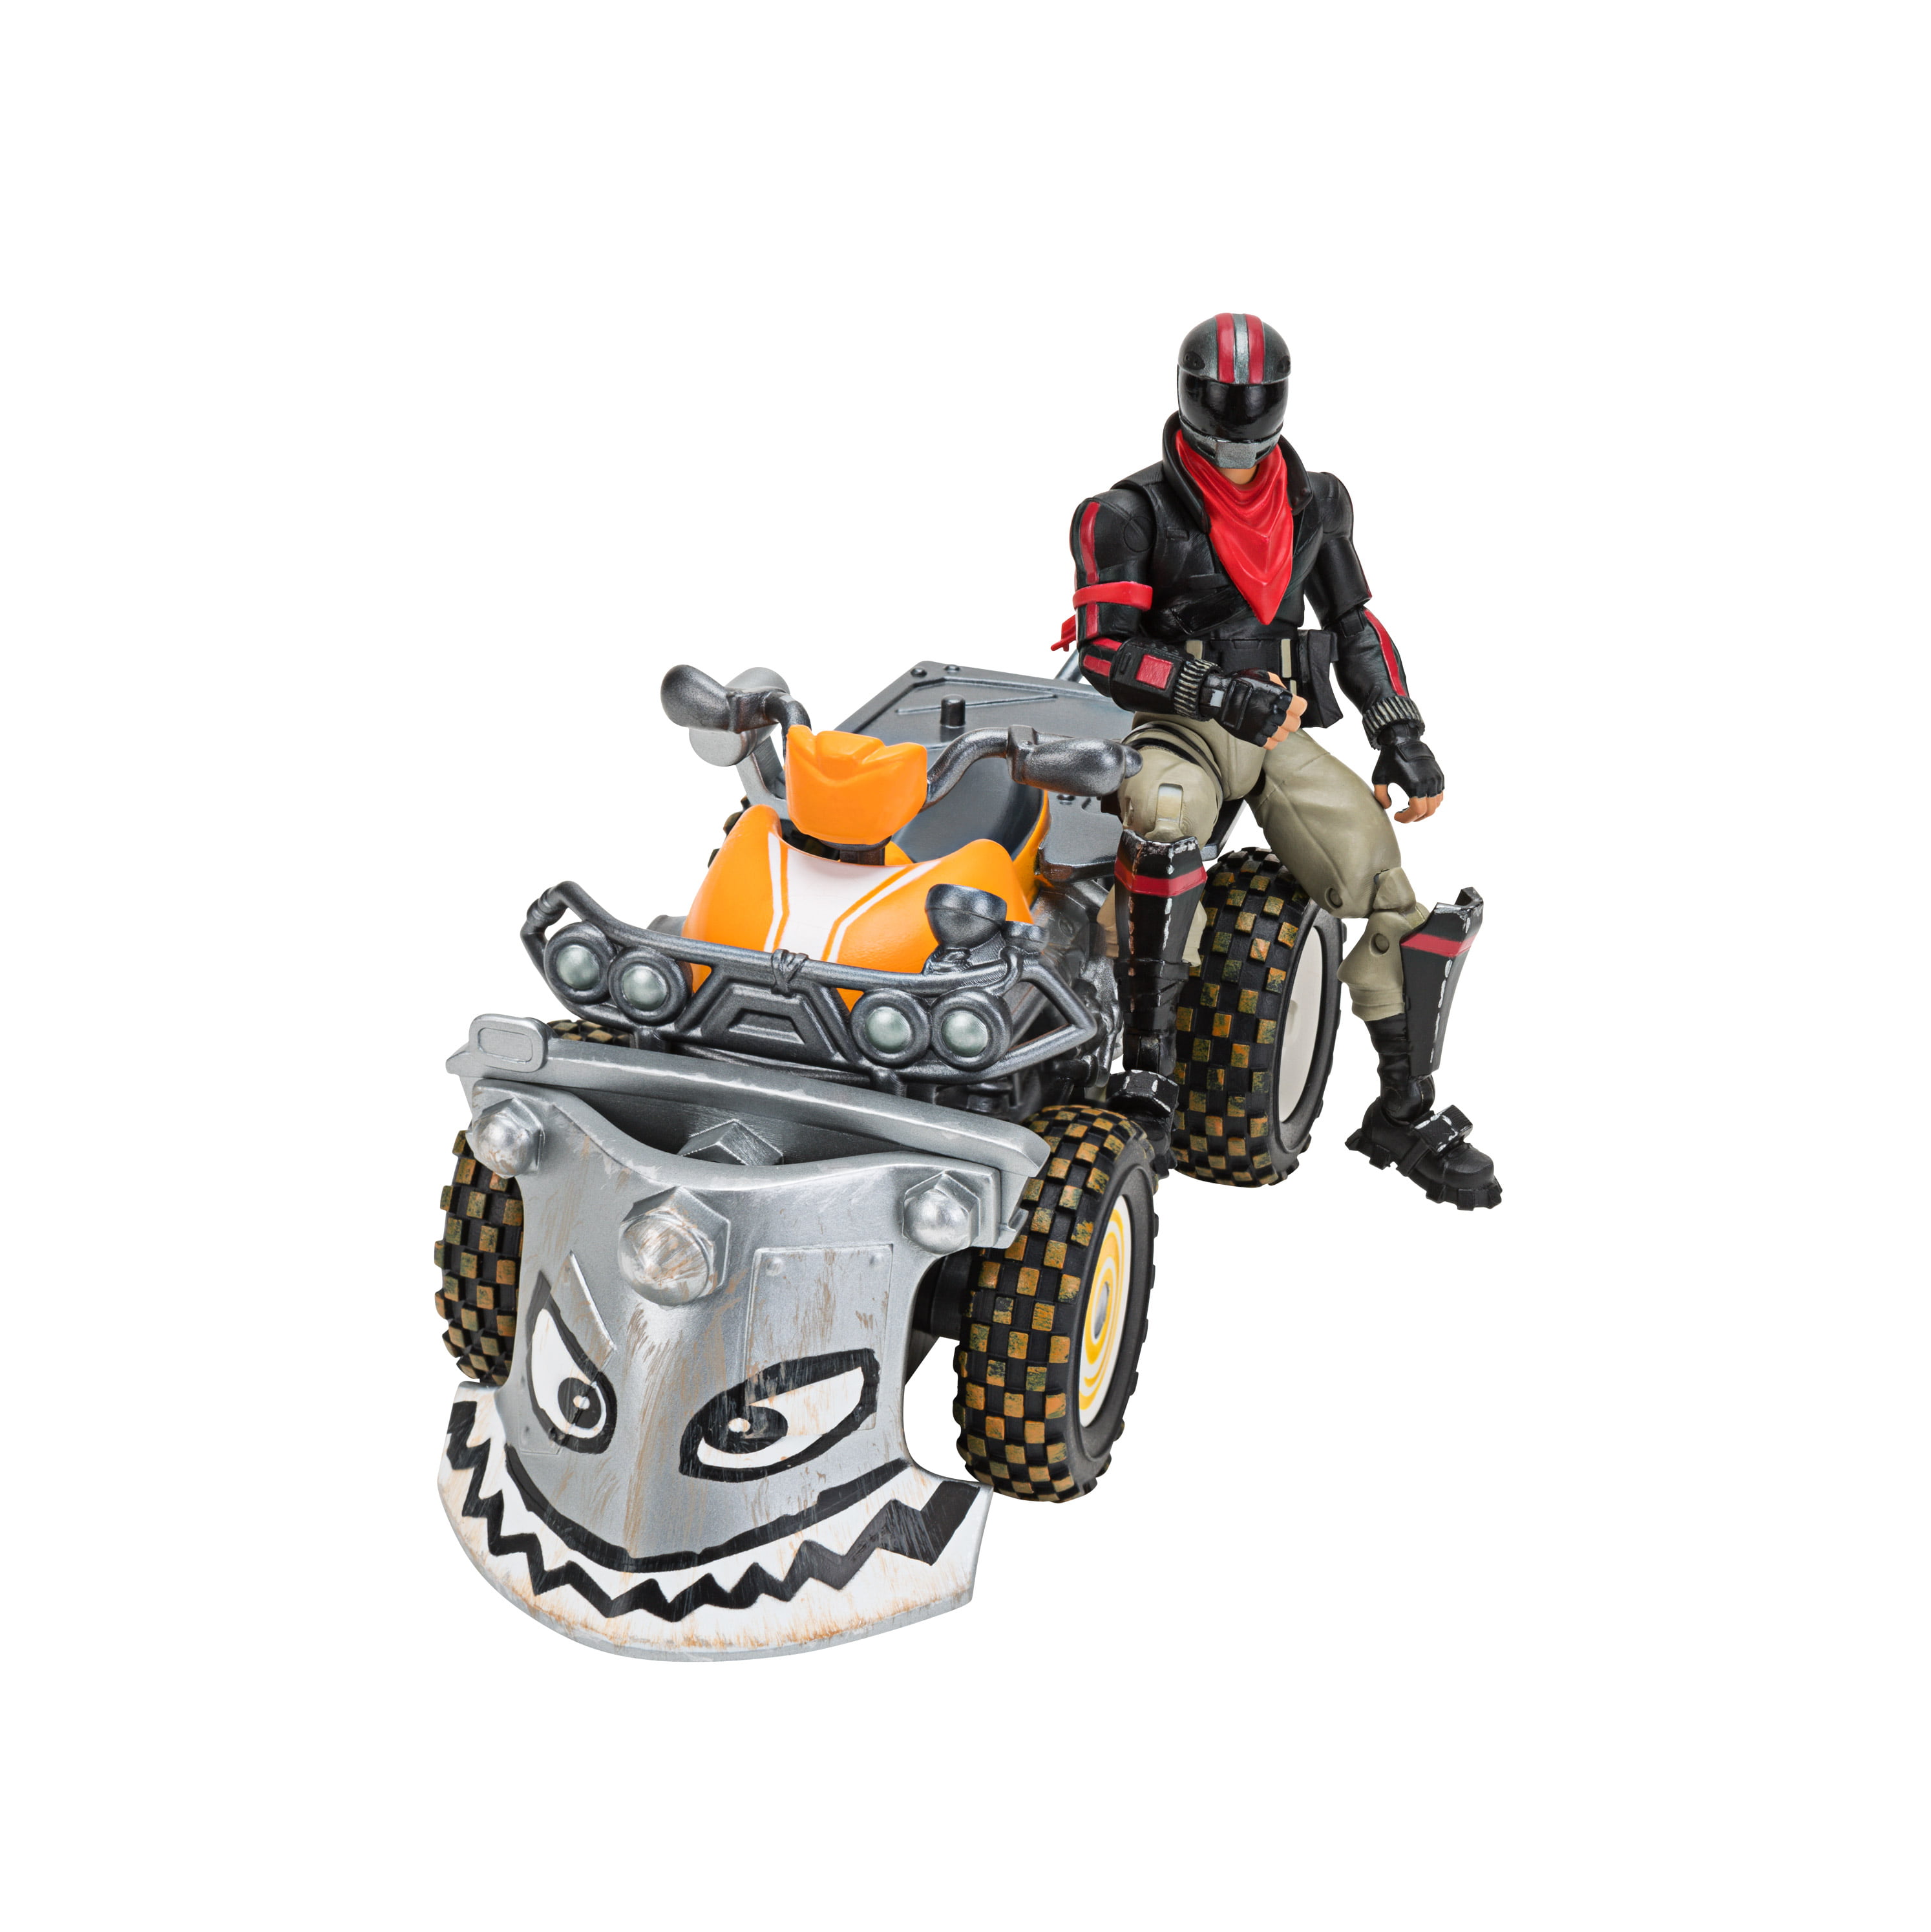 Details about   Fortnite Quadcrasher Vehicle With Burnout 4 Inch Action Figure Included Jazwares 